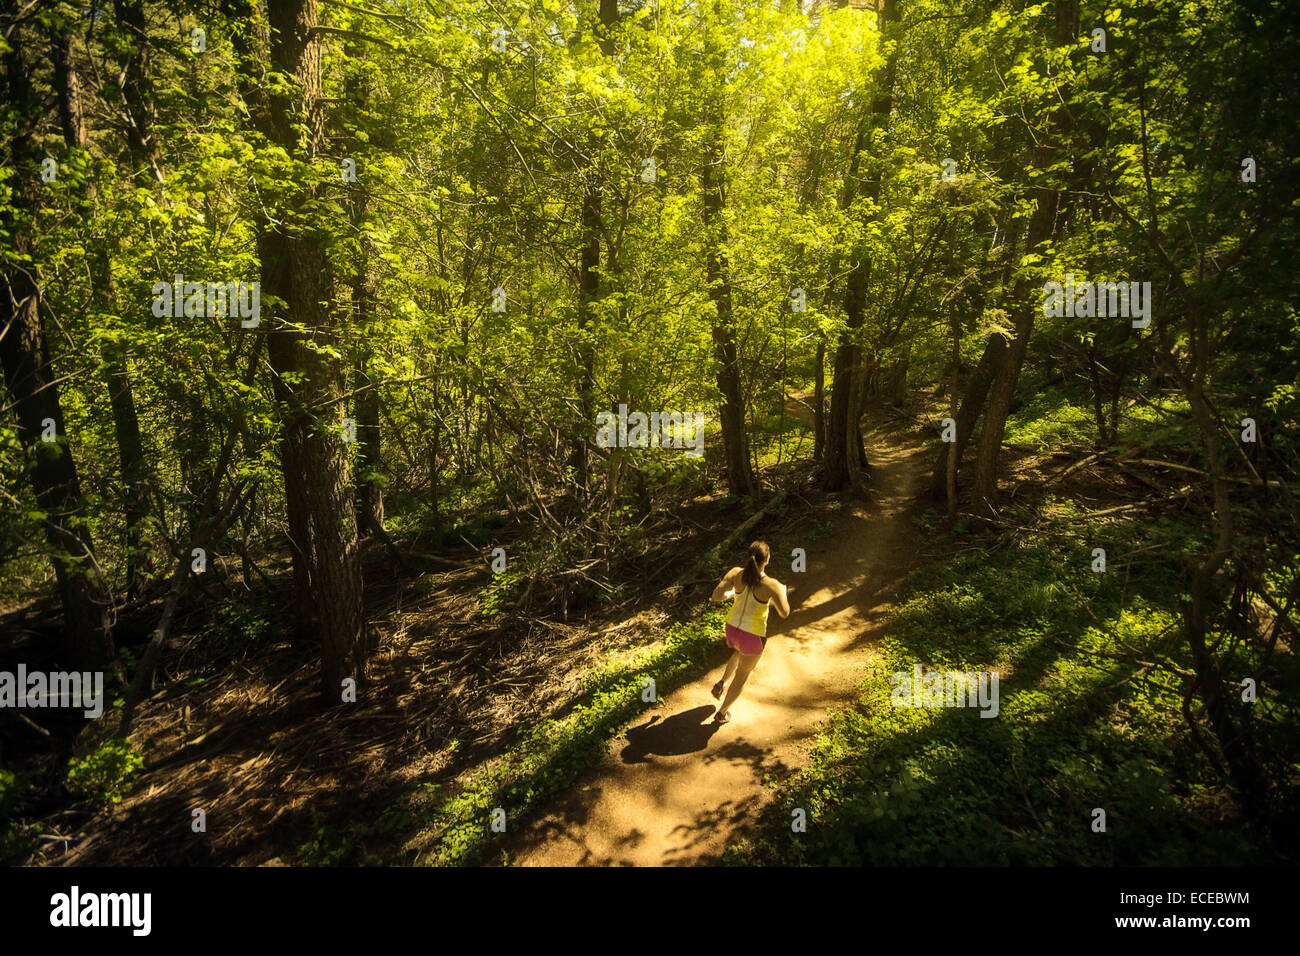 USA, Colorado, Golden, Woman trail running through forest Stock Photo